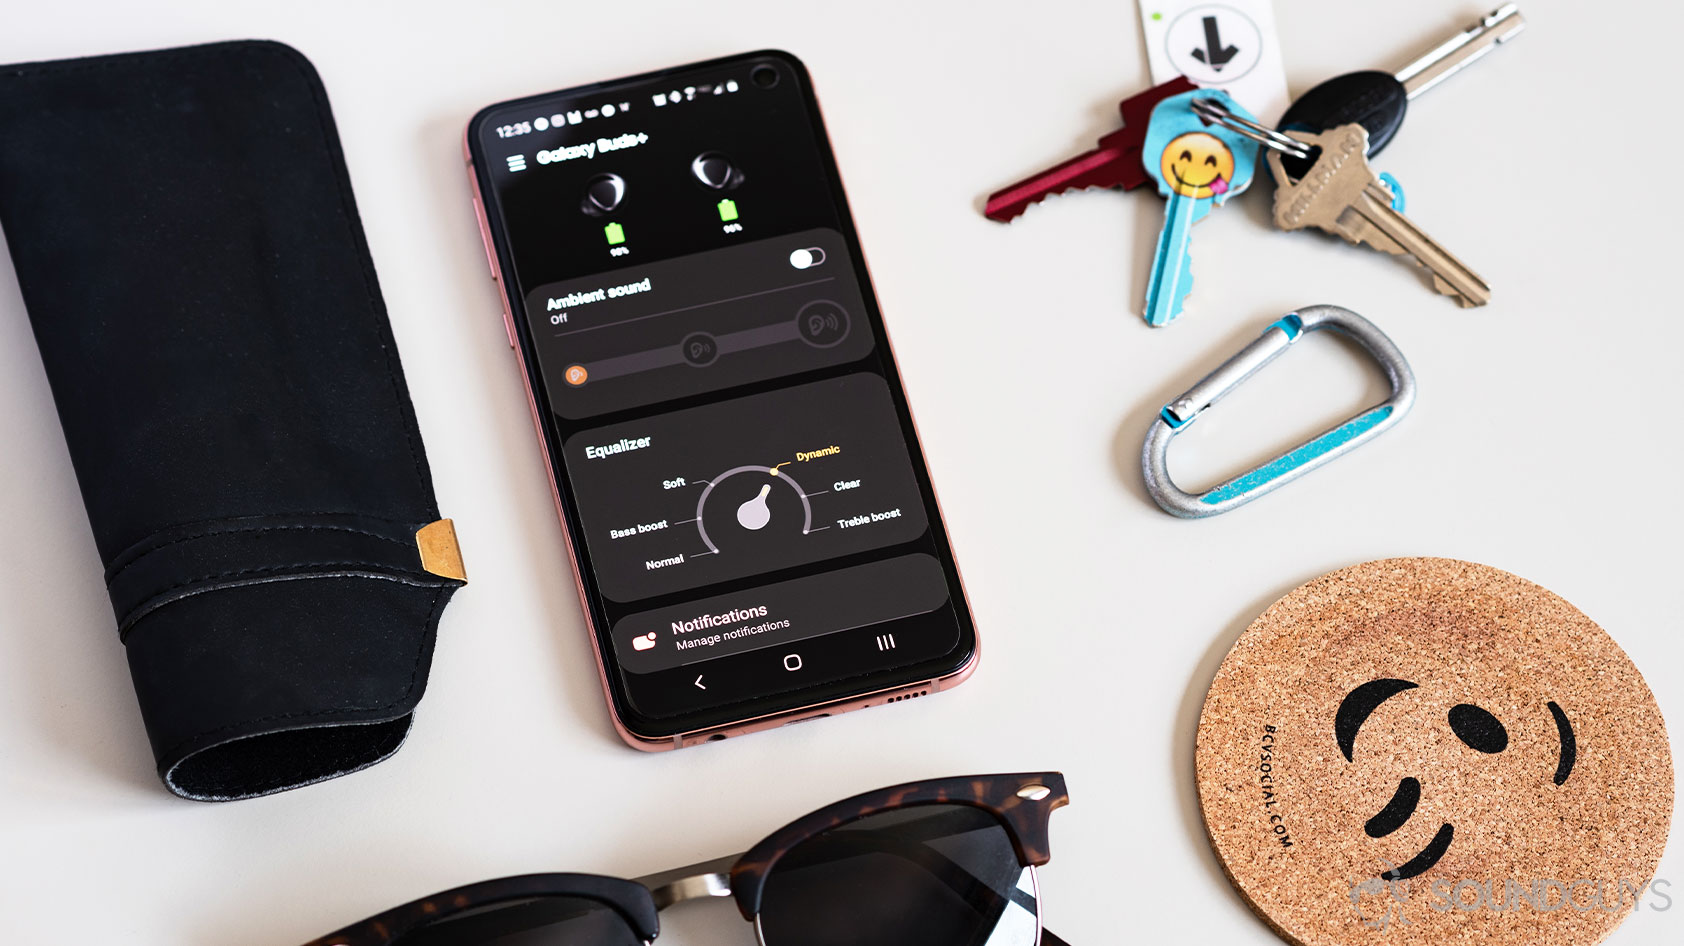 A picture of the Samsung Galaxy Buds Plus Wearable app pulled up on a Samsung Galaxy S10e smartphone.